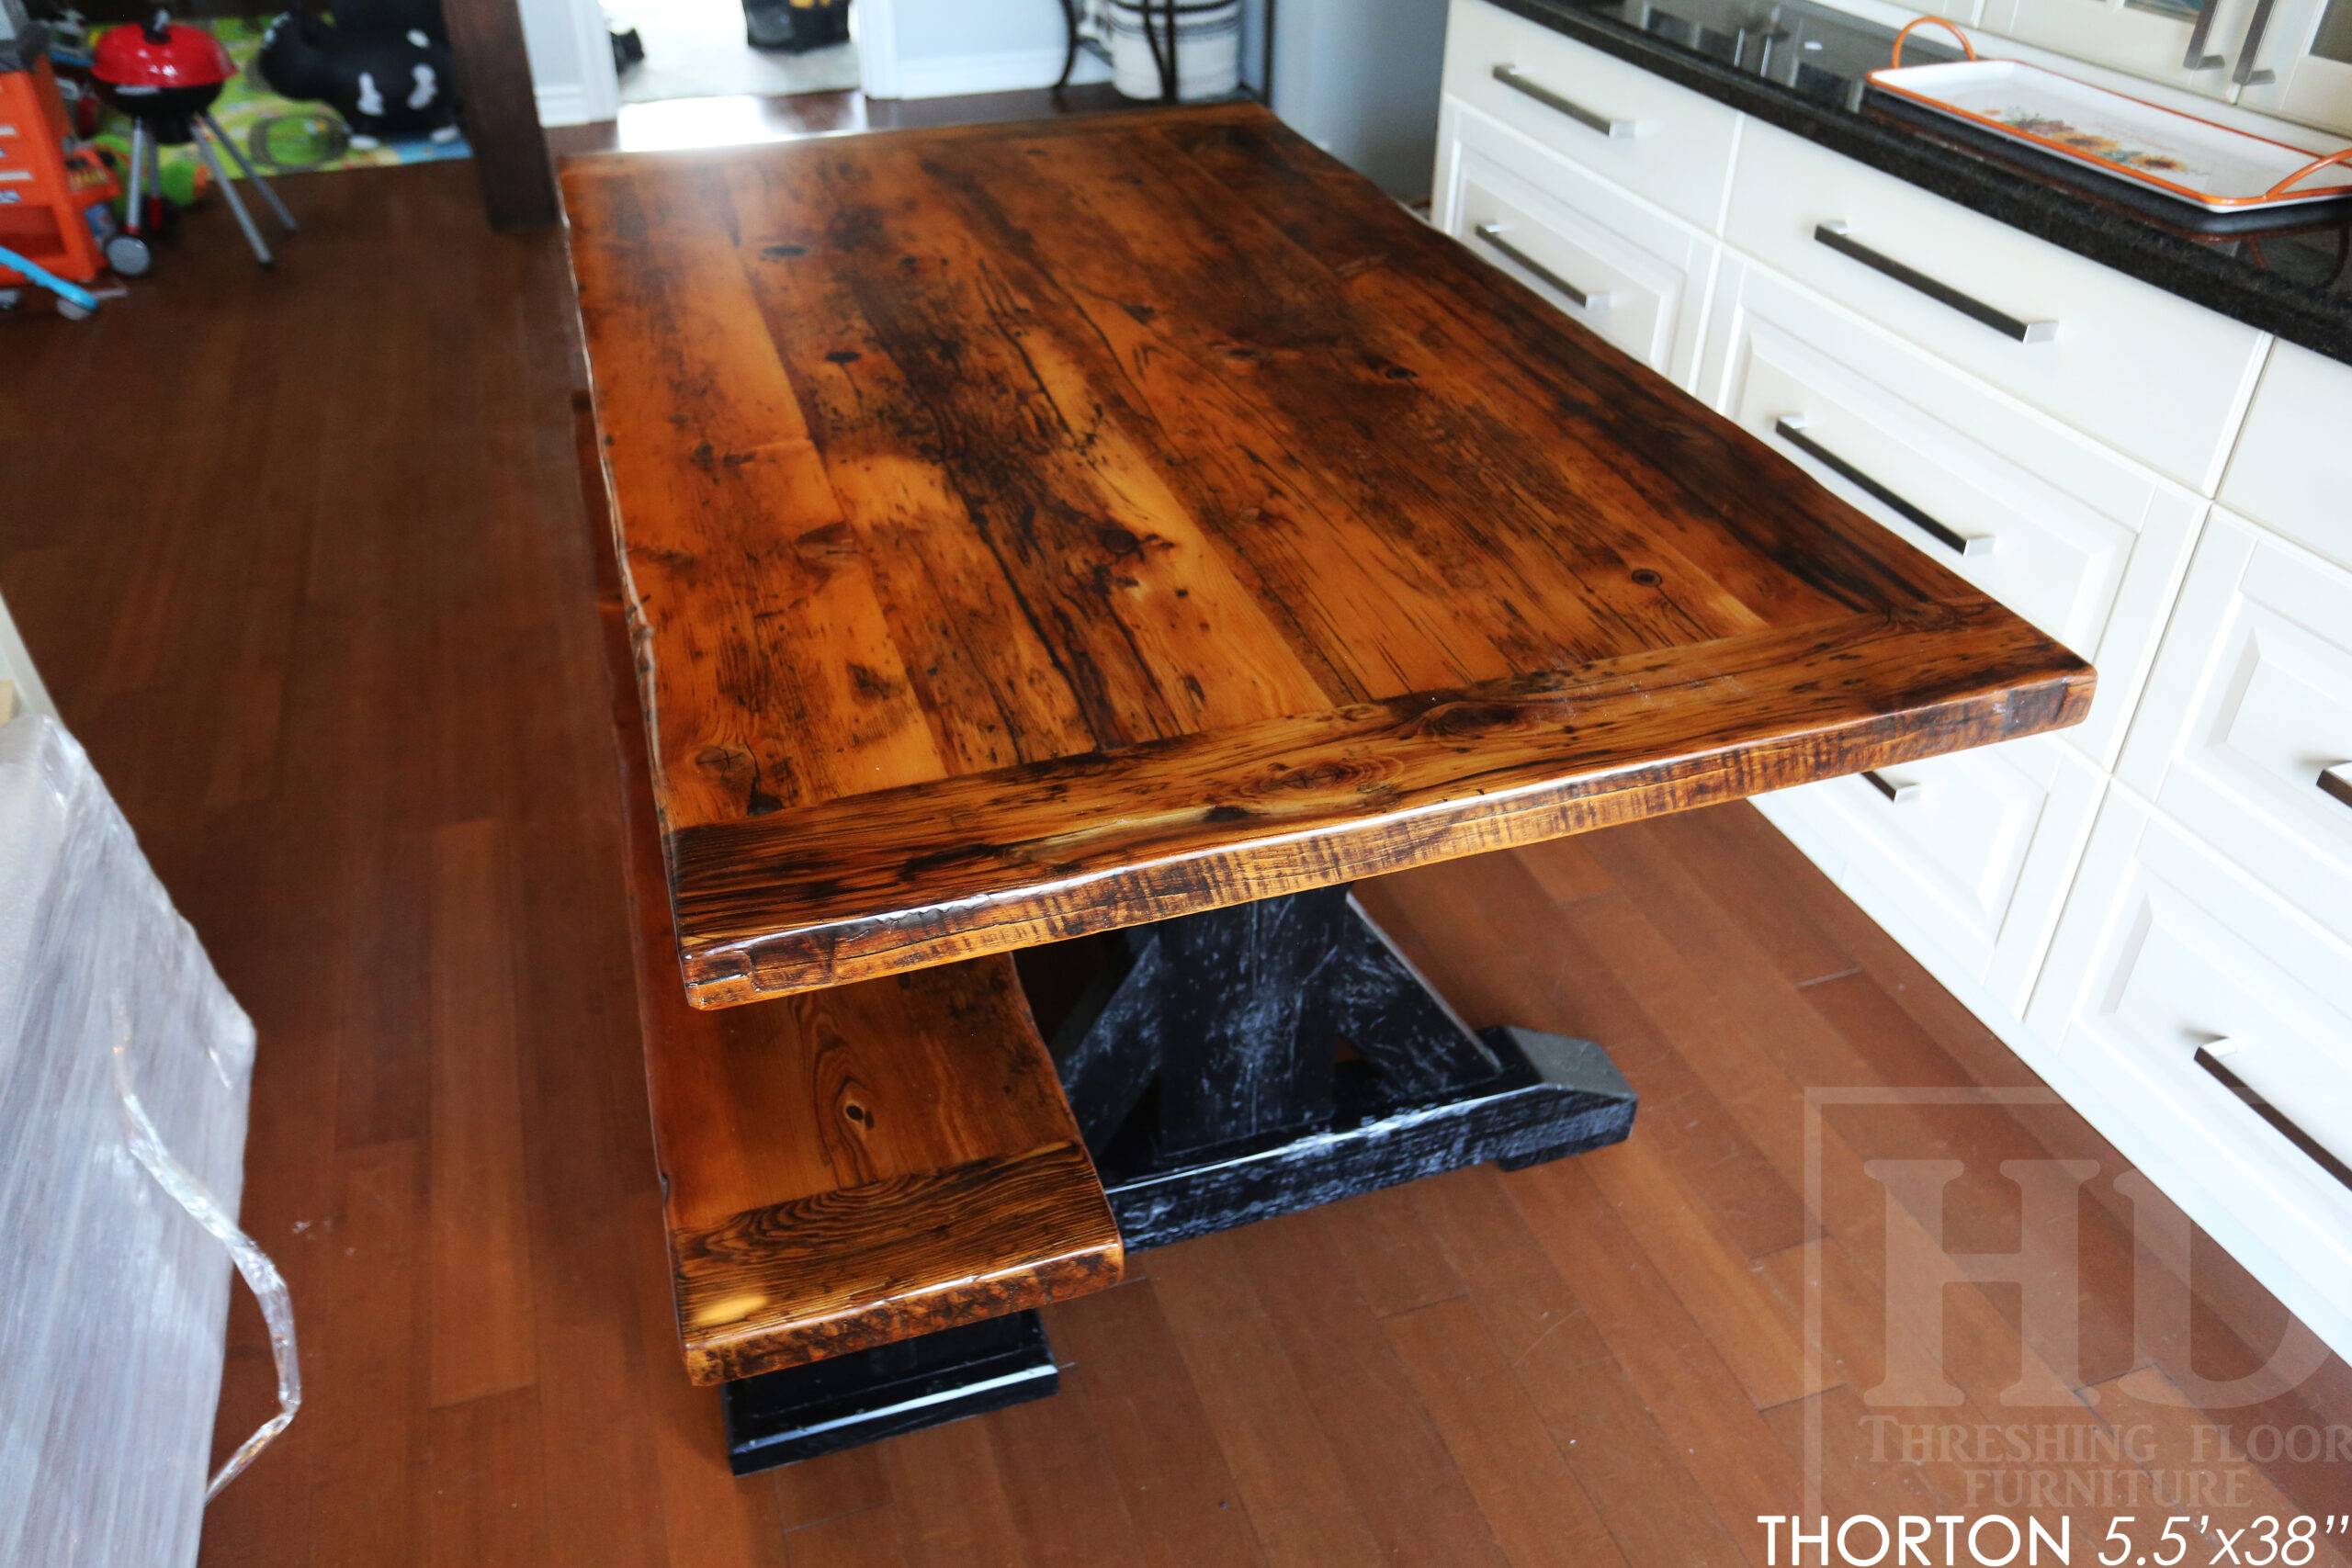 Details: 5.5' Reclaimed Wood Table we made for an Ontario home - 38" wide - Sawbuck Base / Painted Black - Old Growth Hemlock Threshing Floor Construction - Original edges & distressing maintained - Premium epoxy + satin polyurethane finish - 5' Trestle Bench - www.table.ca